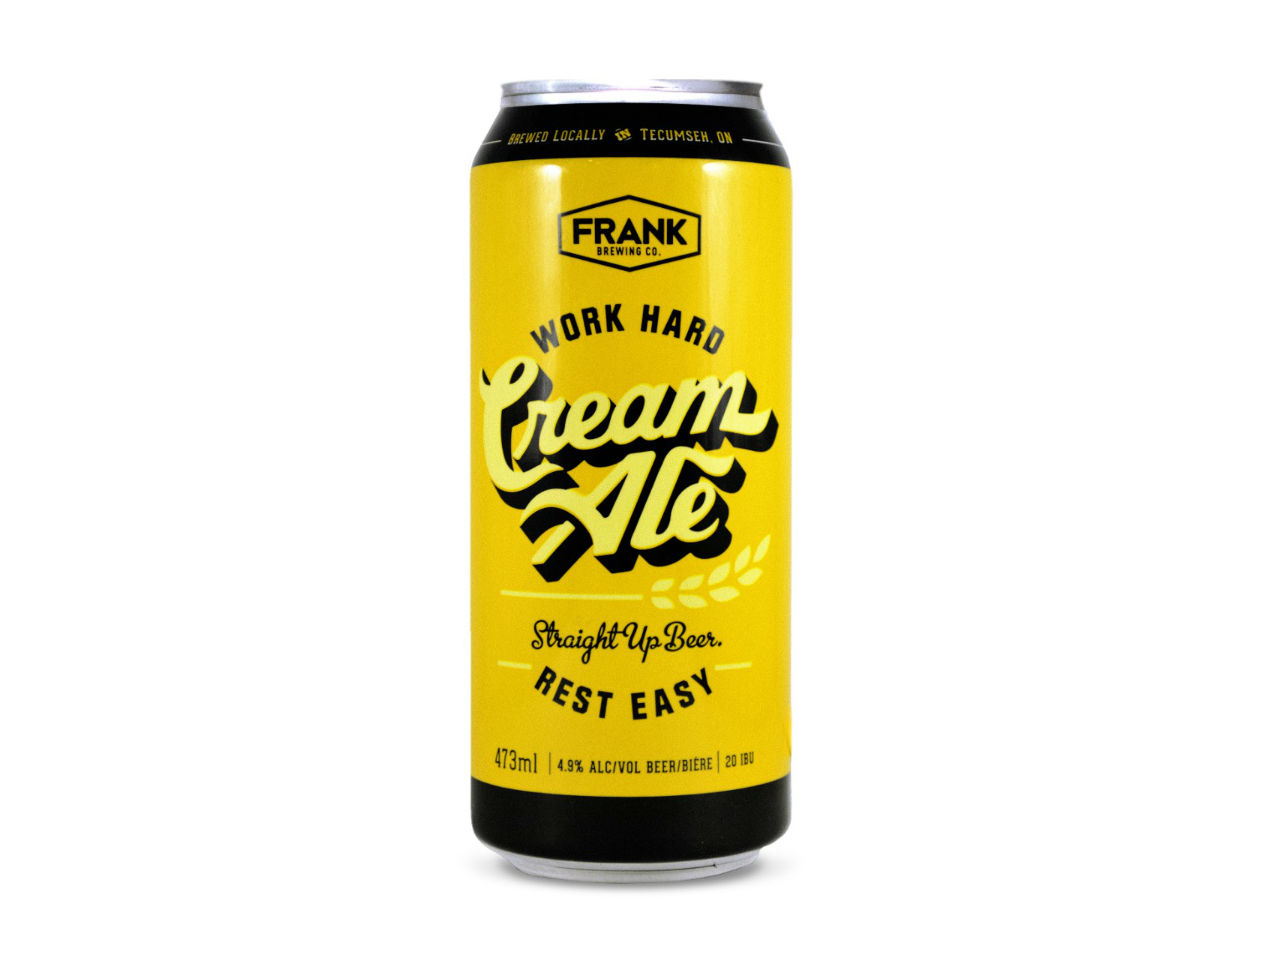 Frank Brewing Co. Cream Ale in yellow can